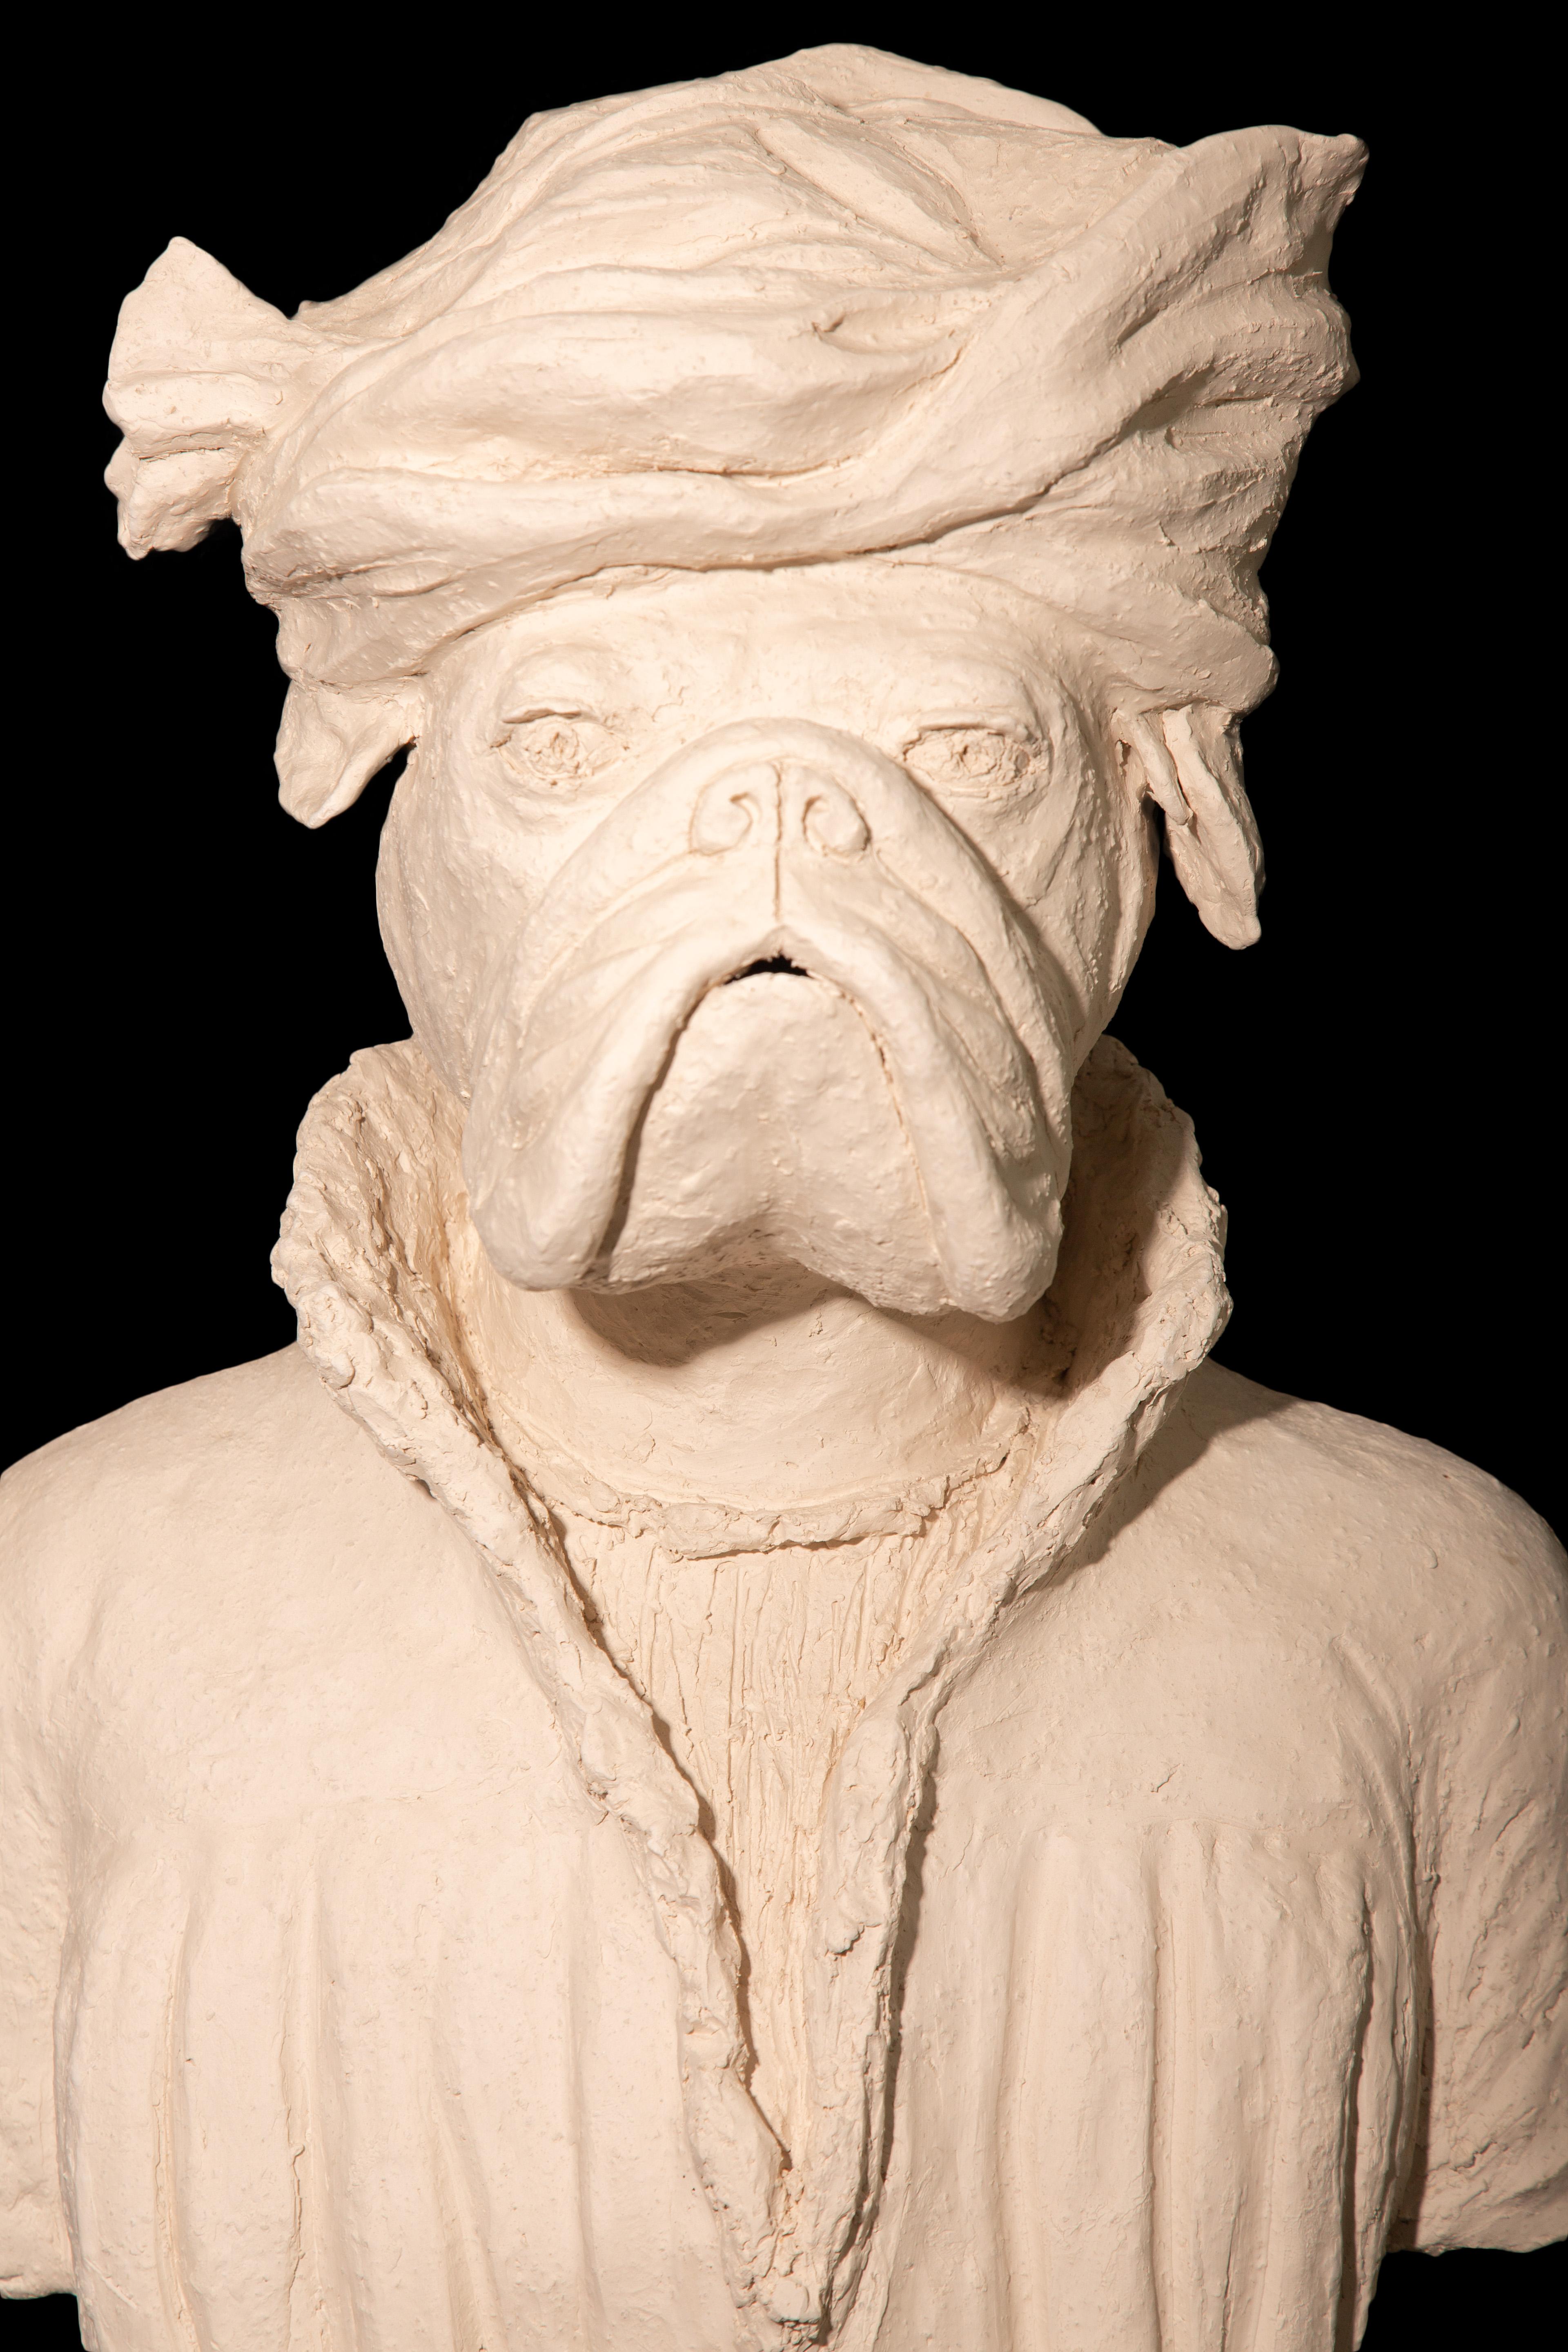 Terracotta anthropomorphic figure of a Bulldog Wearing a Turban and 19th century costume by Laurence Lenglare

Measures: 19